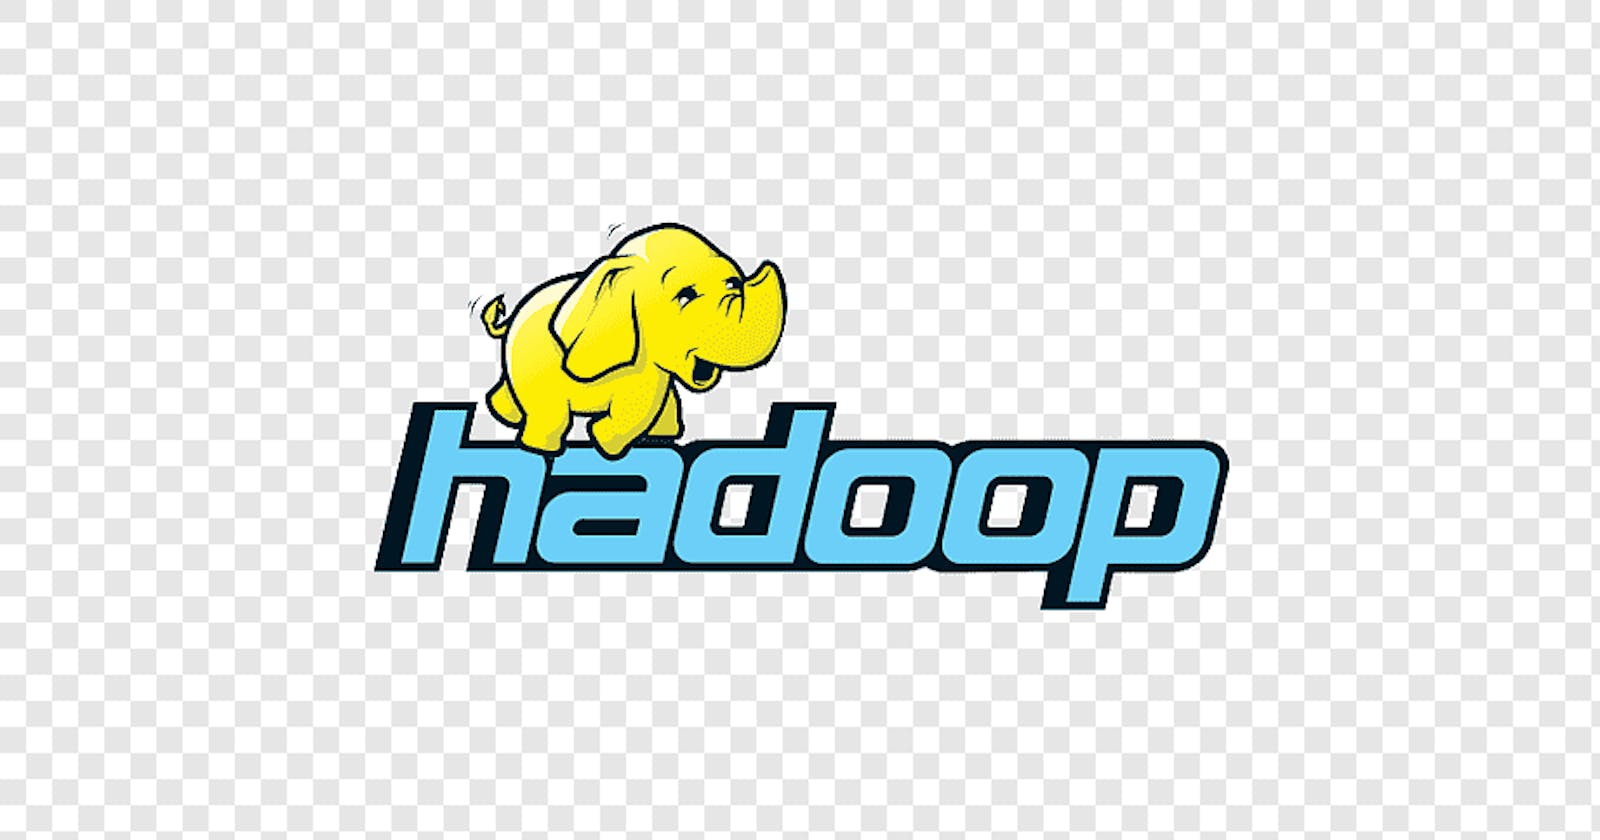 HDFS - Hadoop Distributed Filesystem